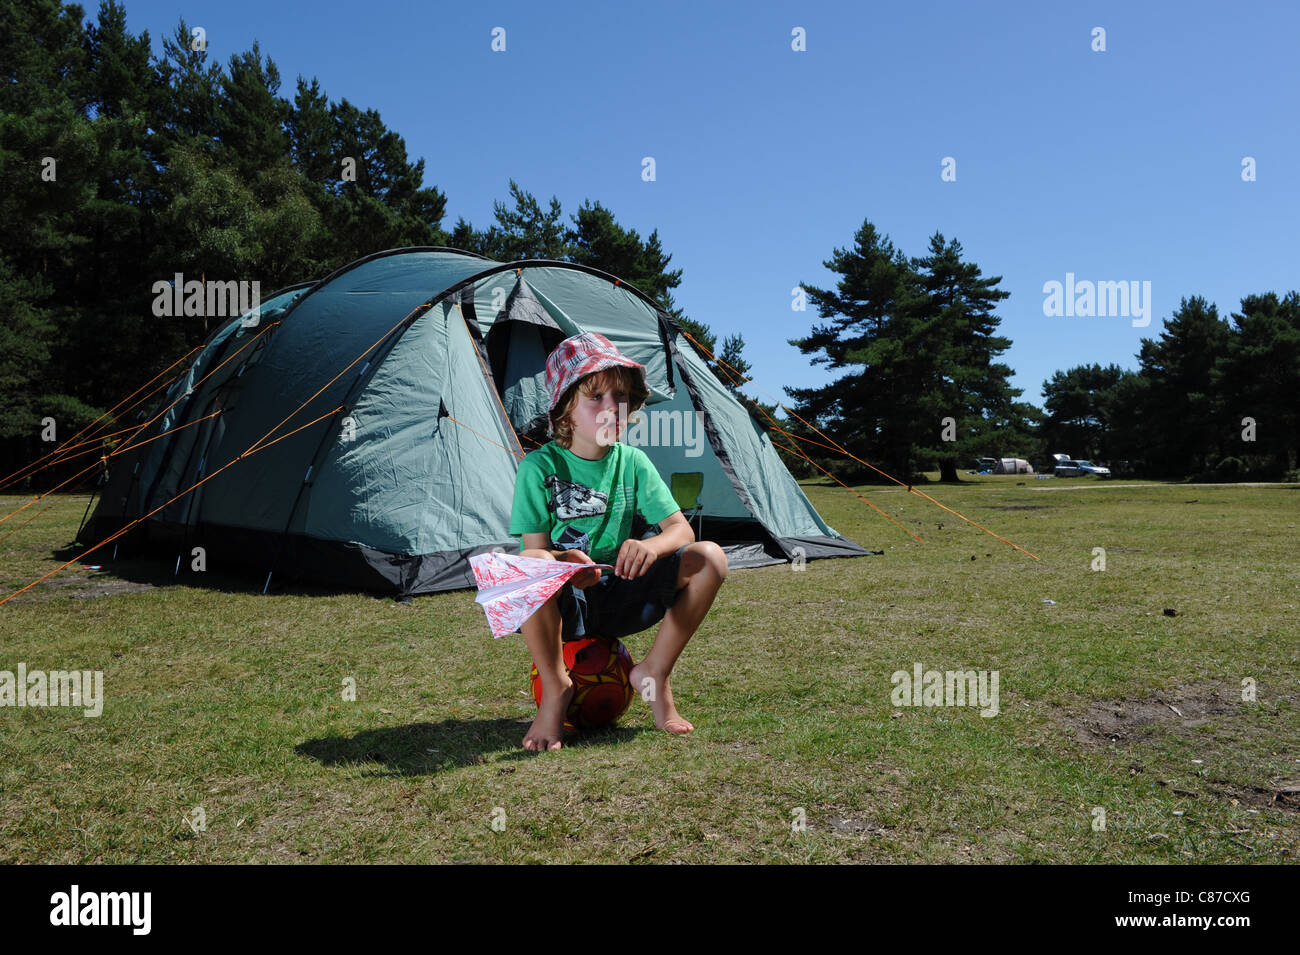 a young boy rests siting  on a football with a paper aeroplane during a camping holiday enjoying the sun Stock Photo